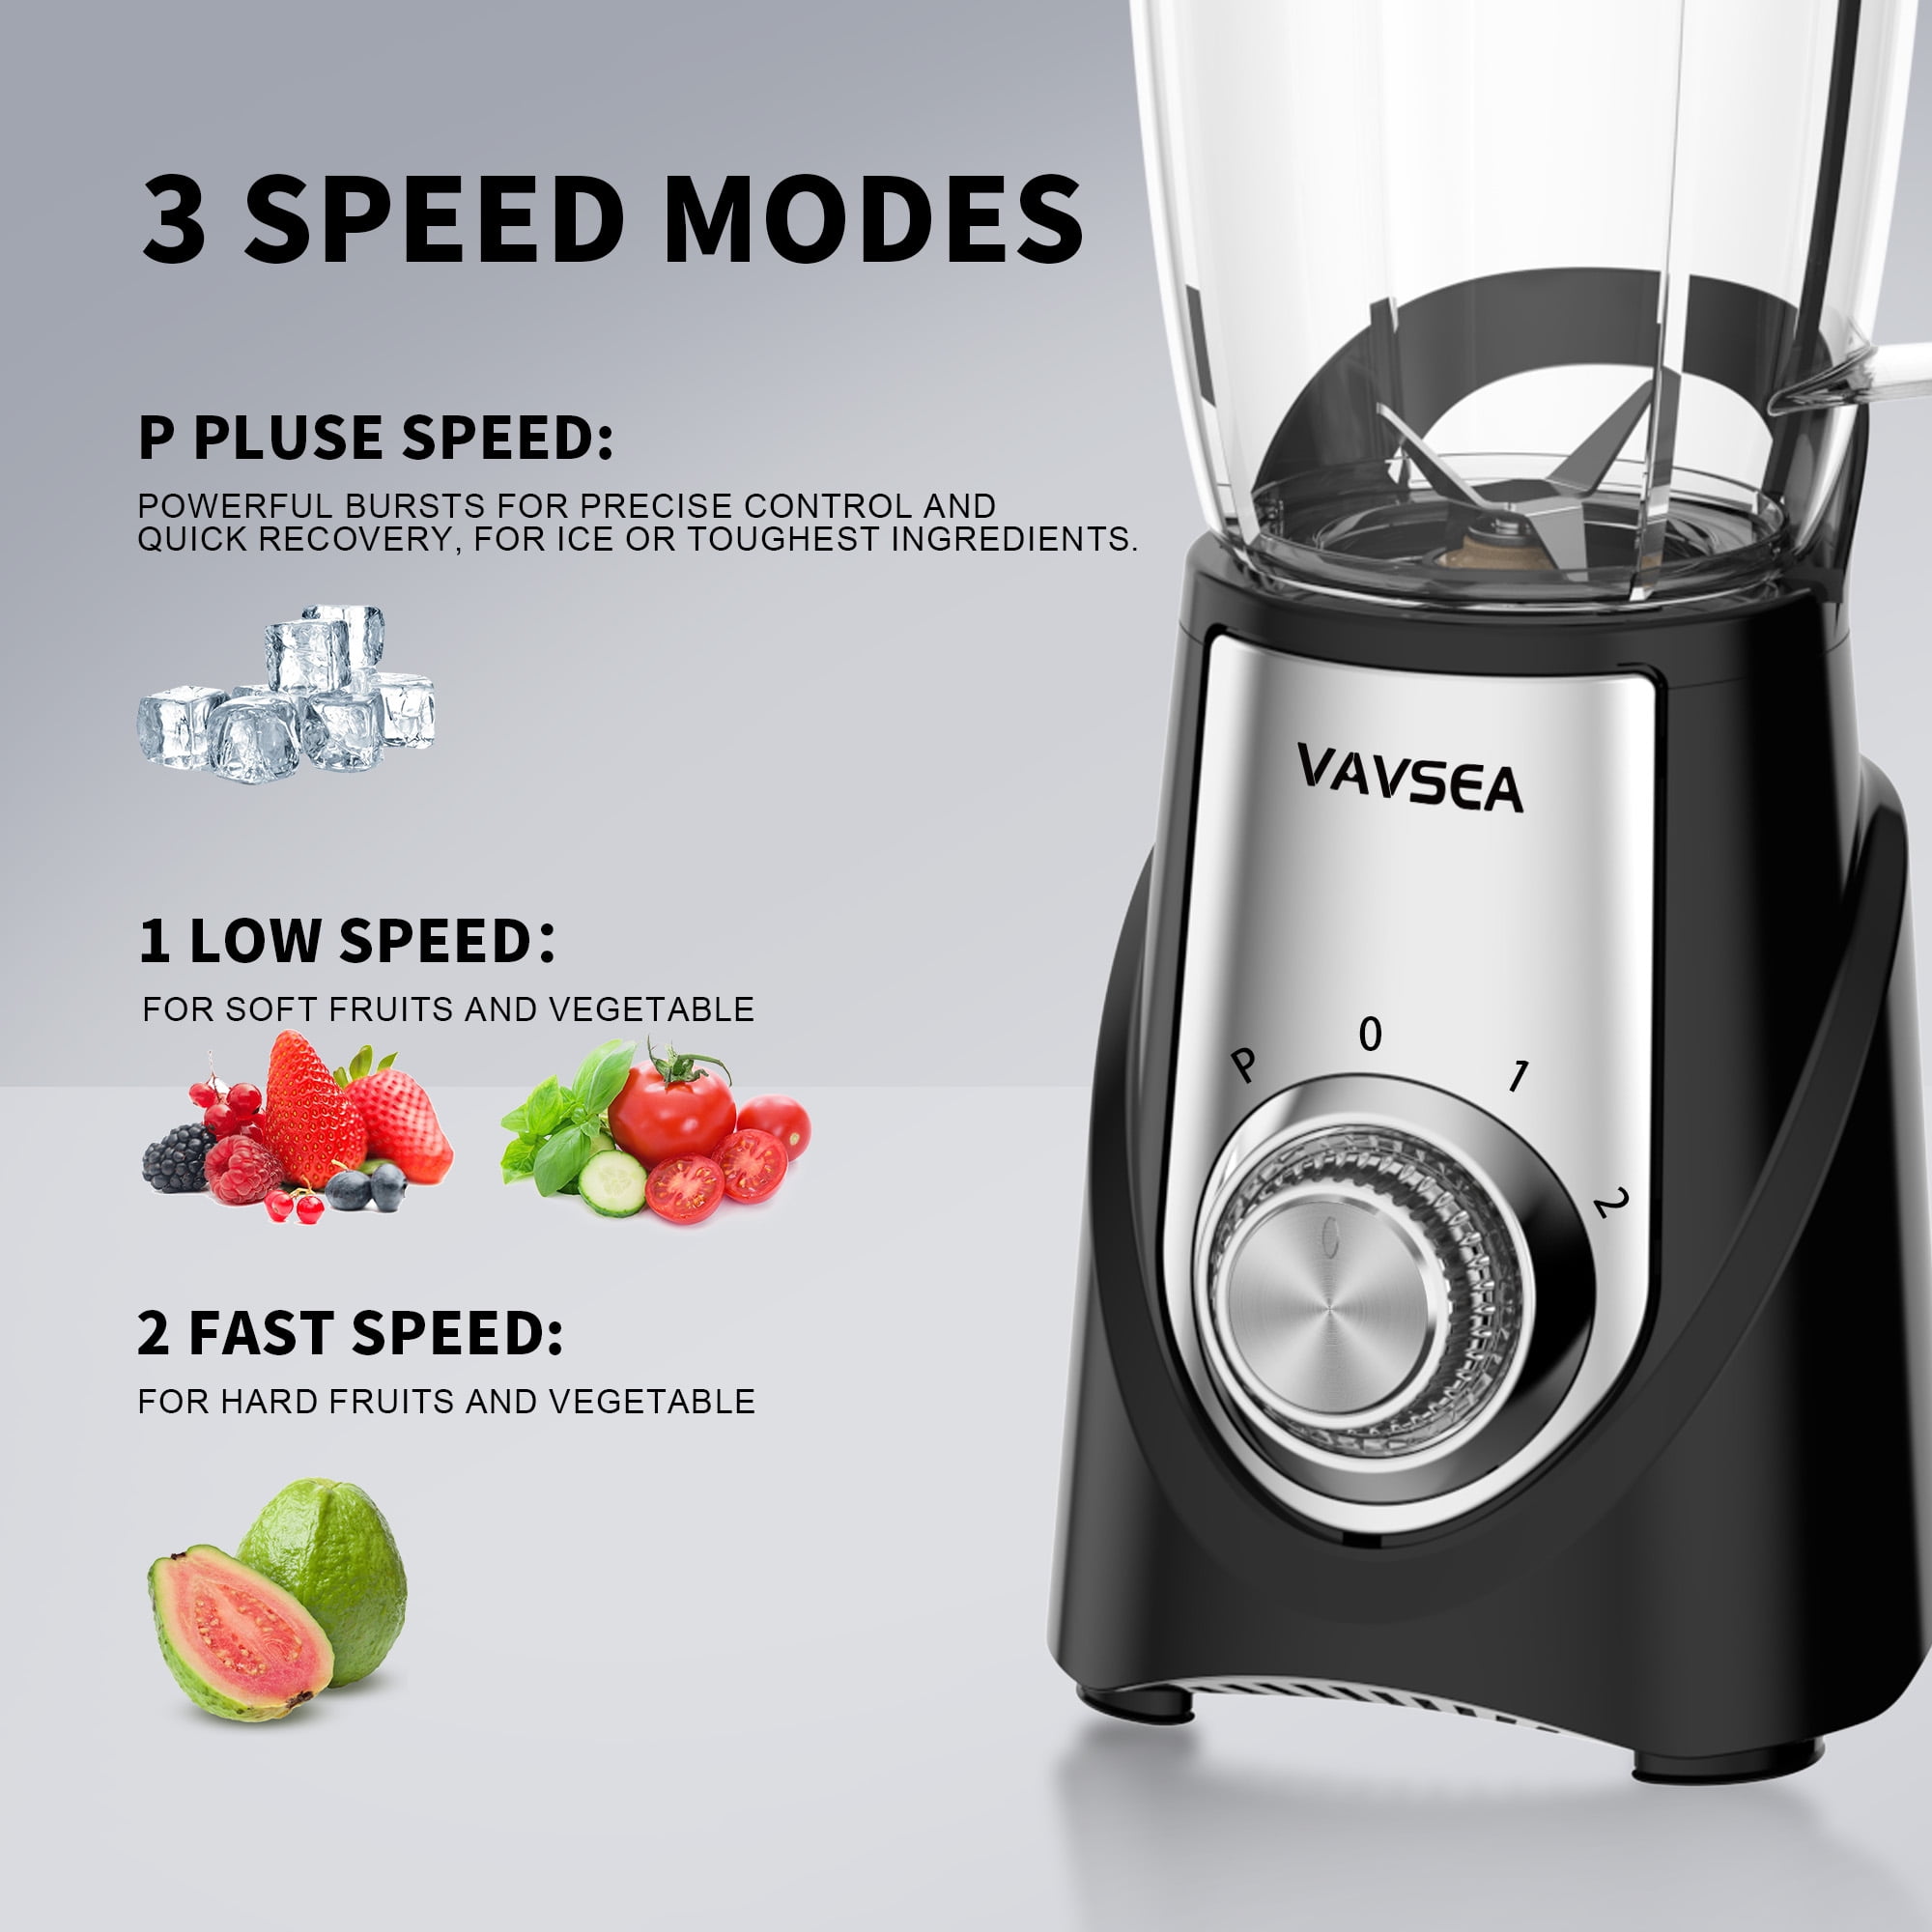 VAVSEA 1000W Smoothie Blender for Shakes and Smoothies, 3 IN1